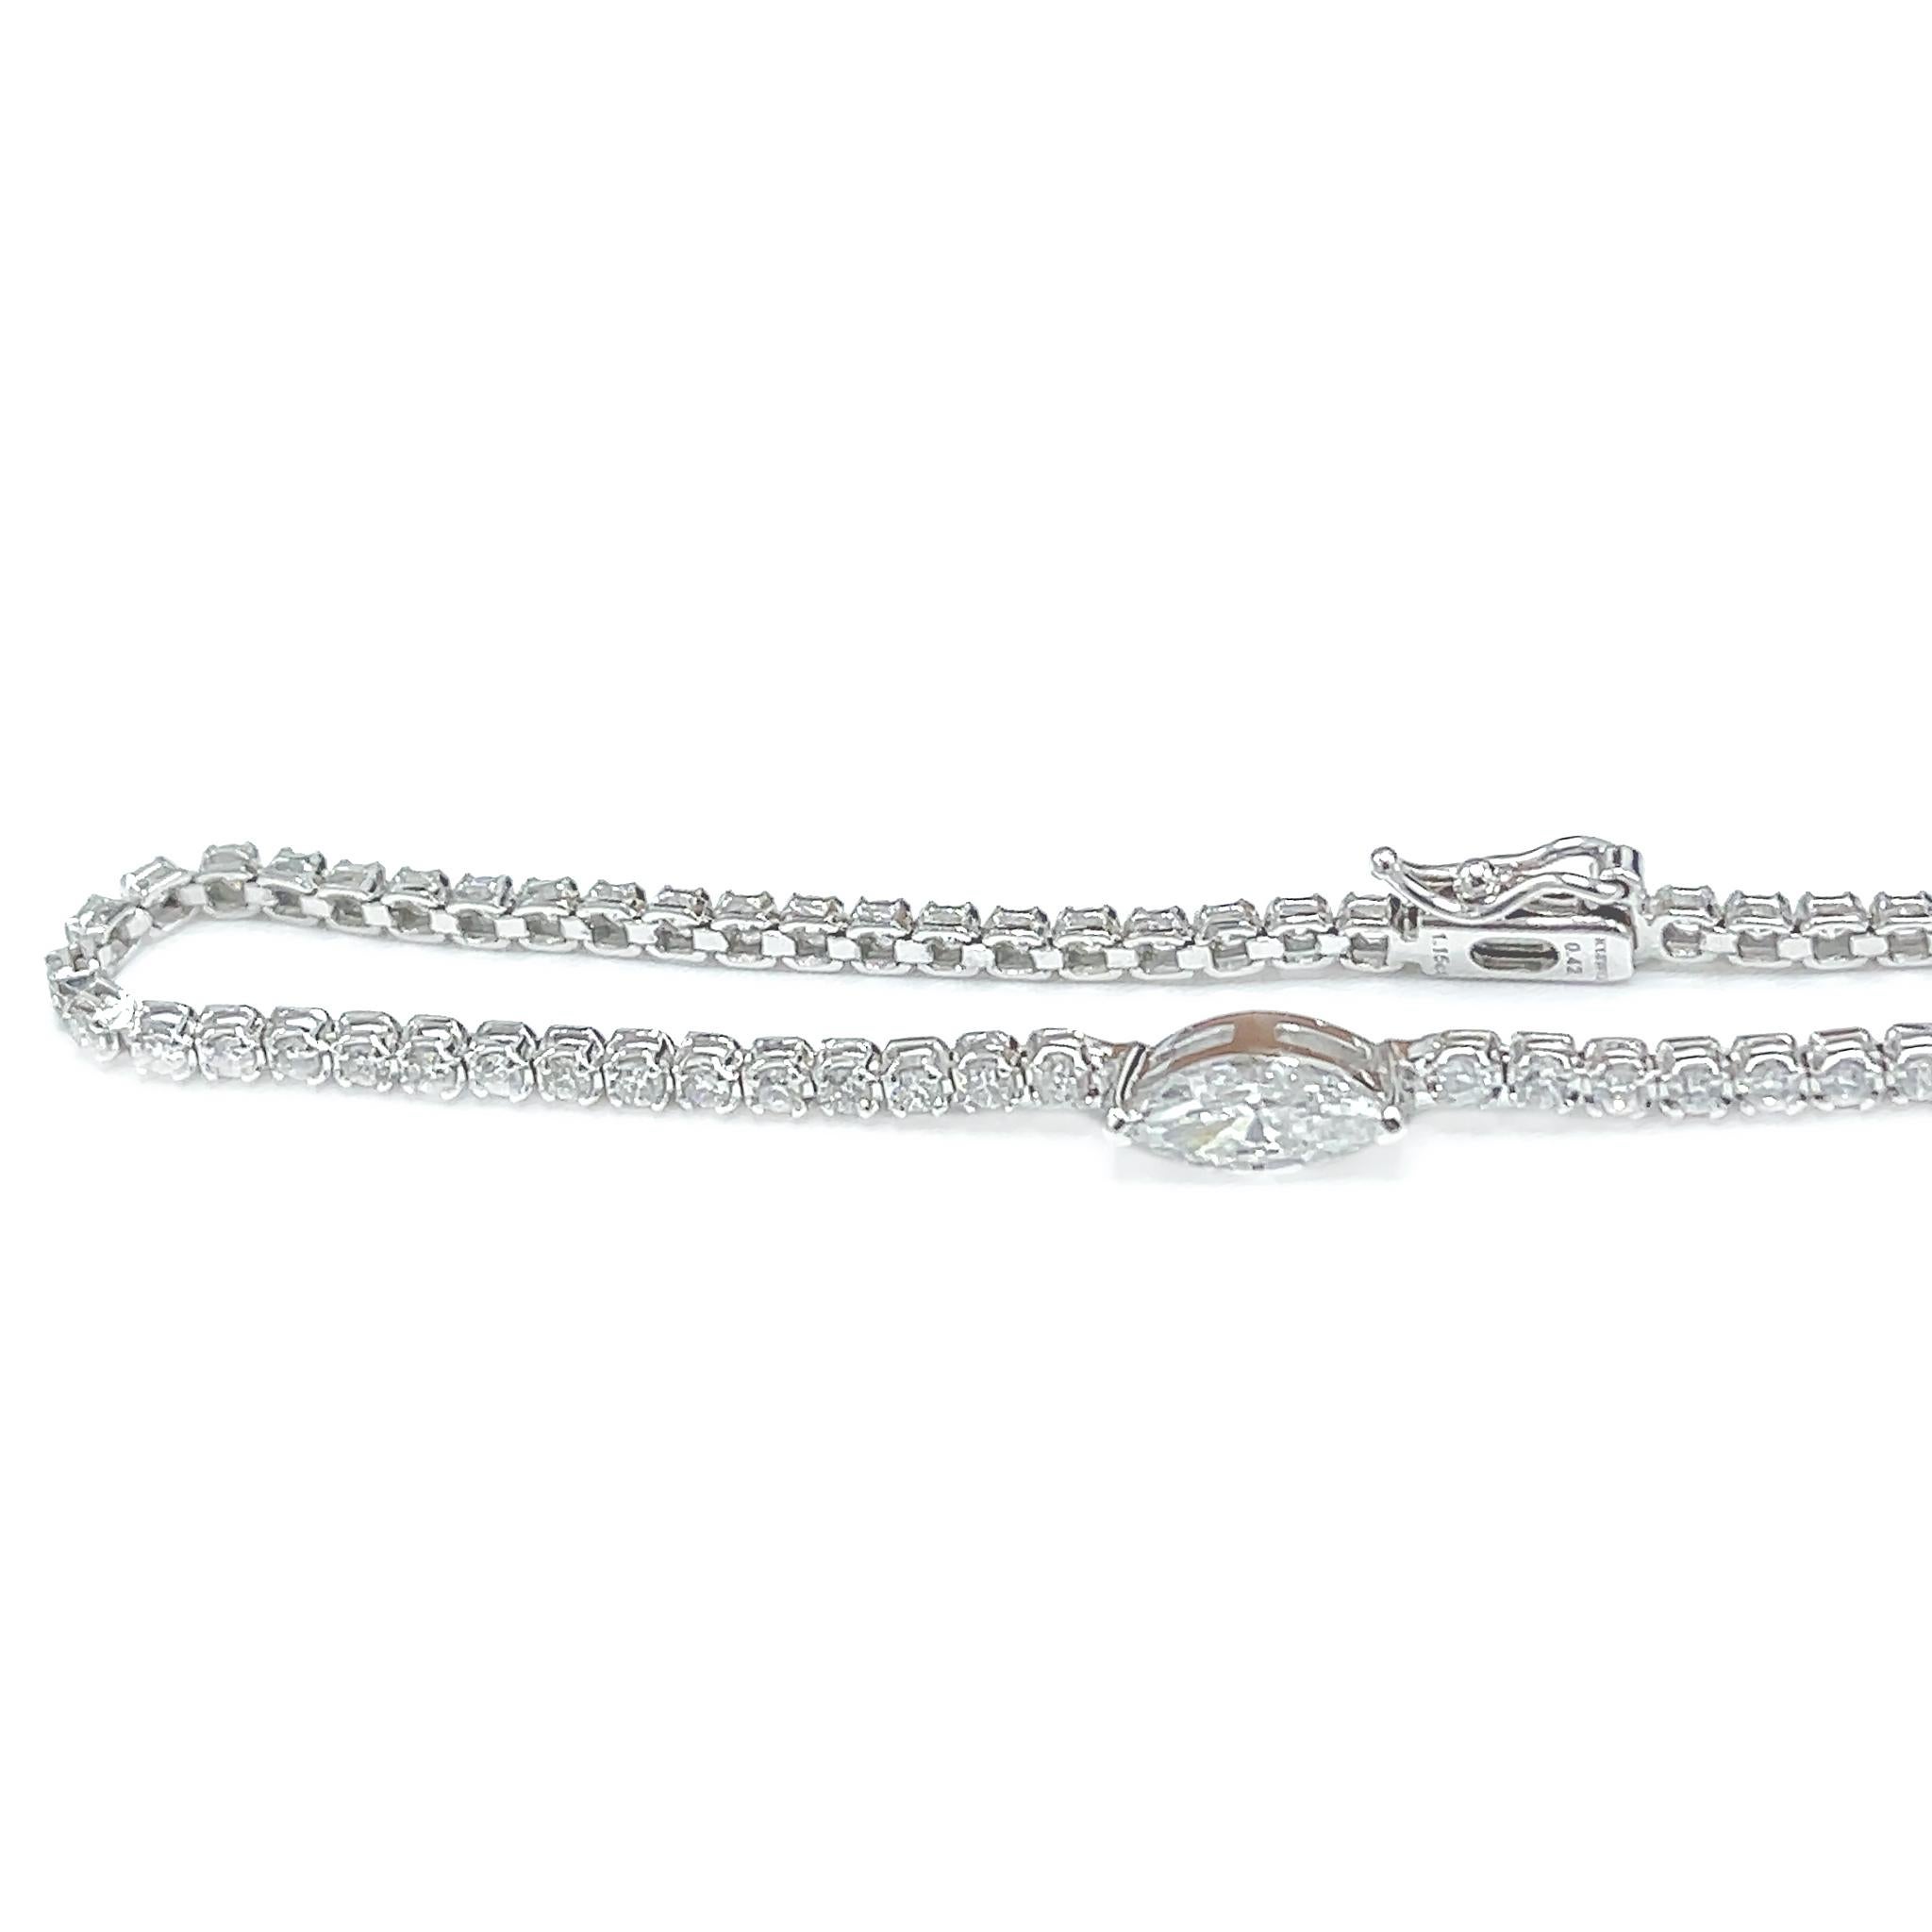 18 kt White Gold
Diamond: 1.57 ct twd
Length: 7 inches